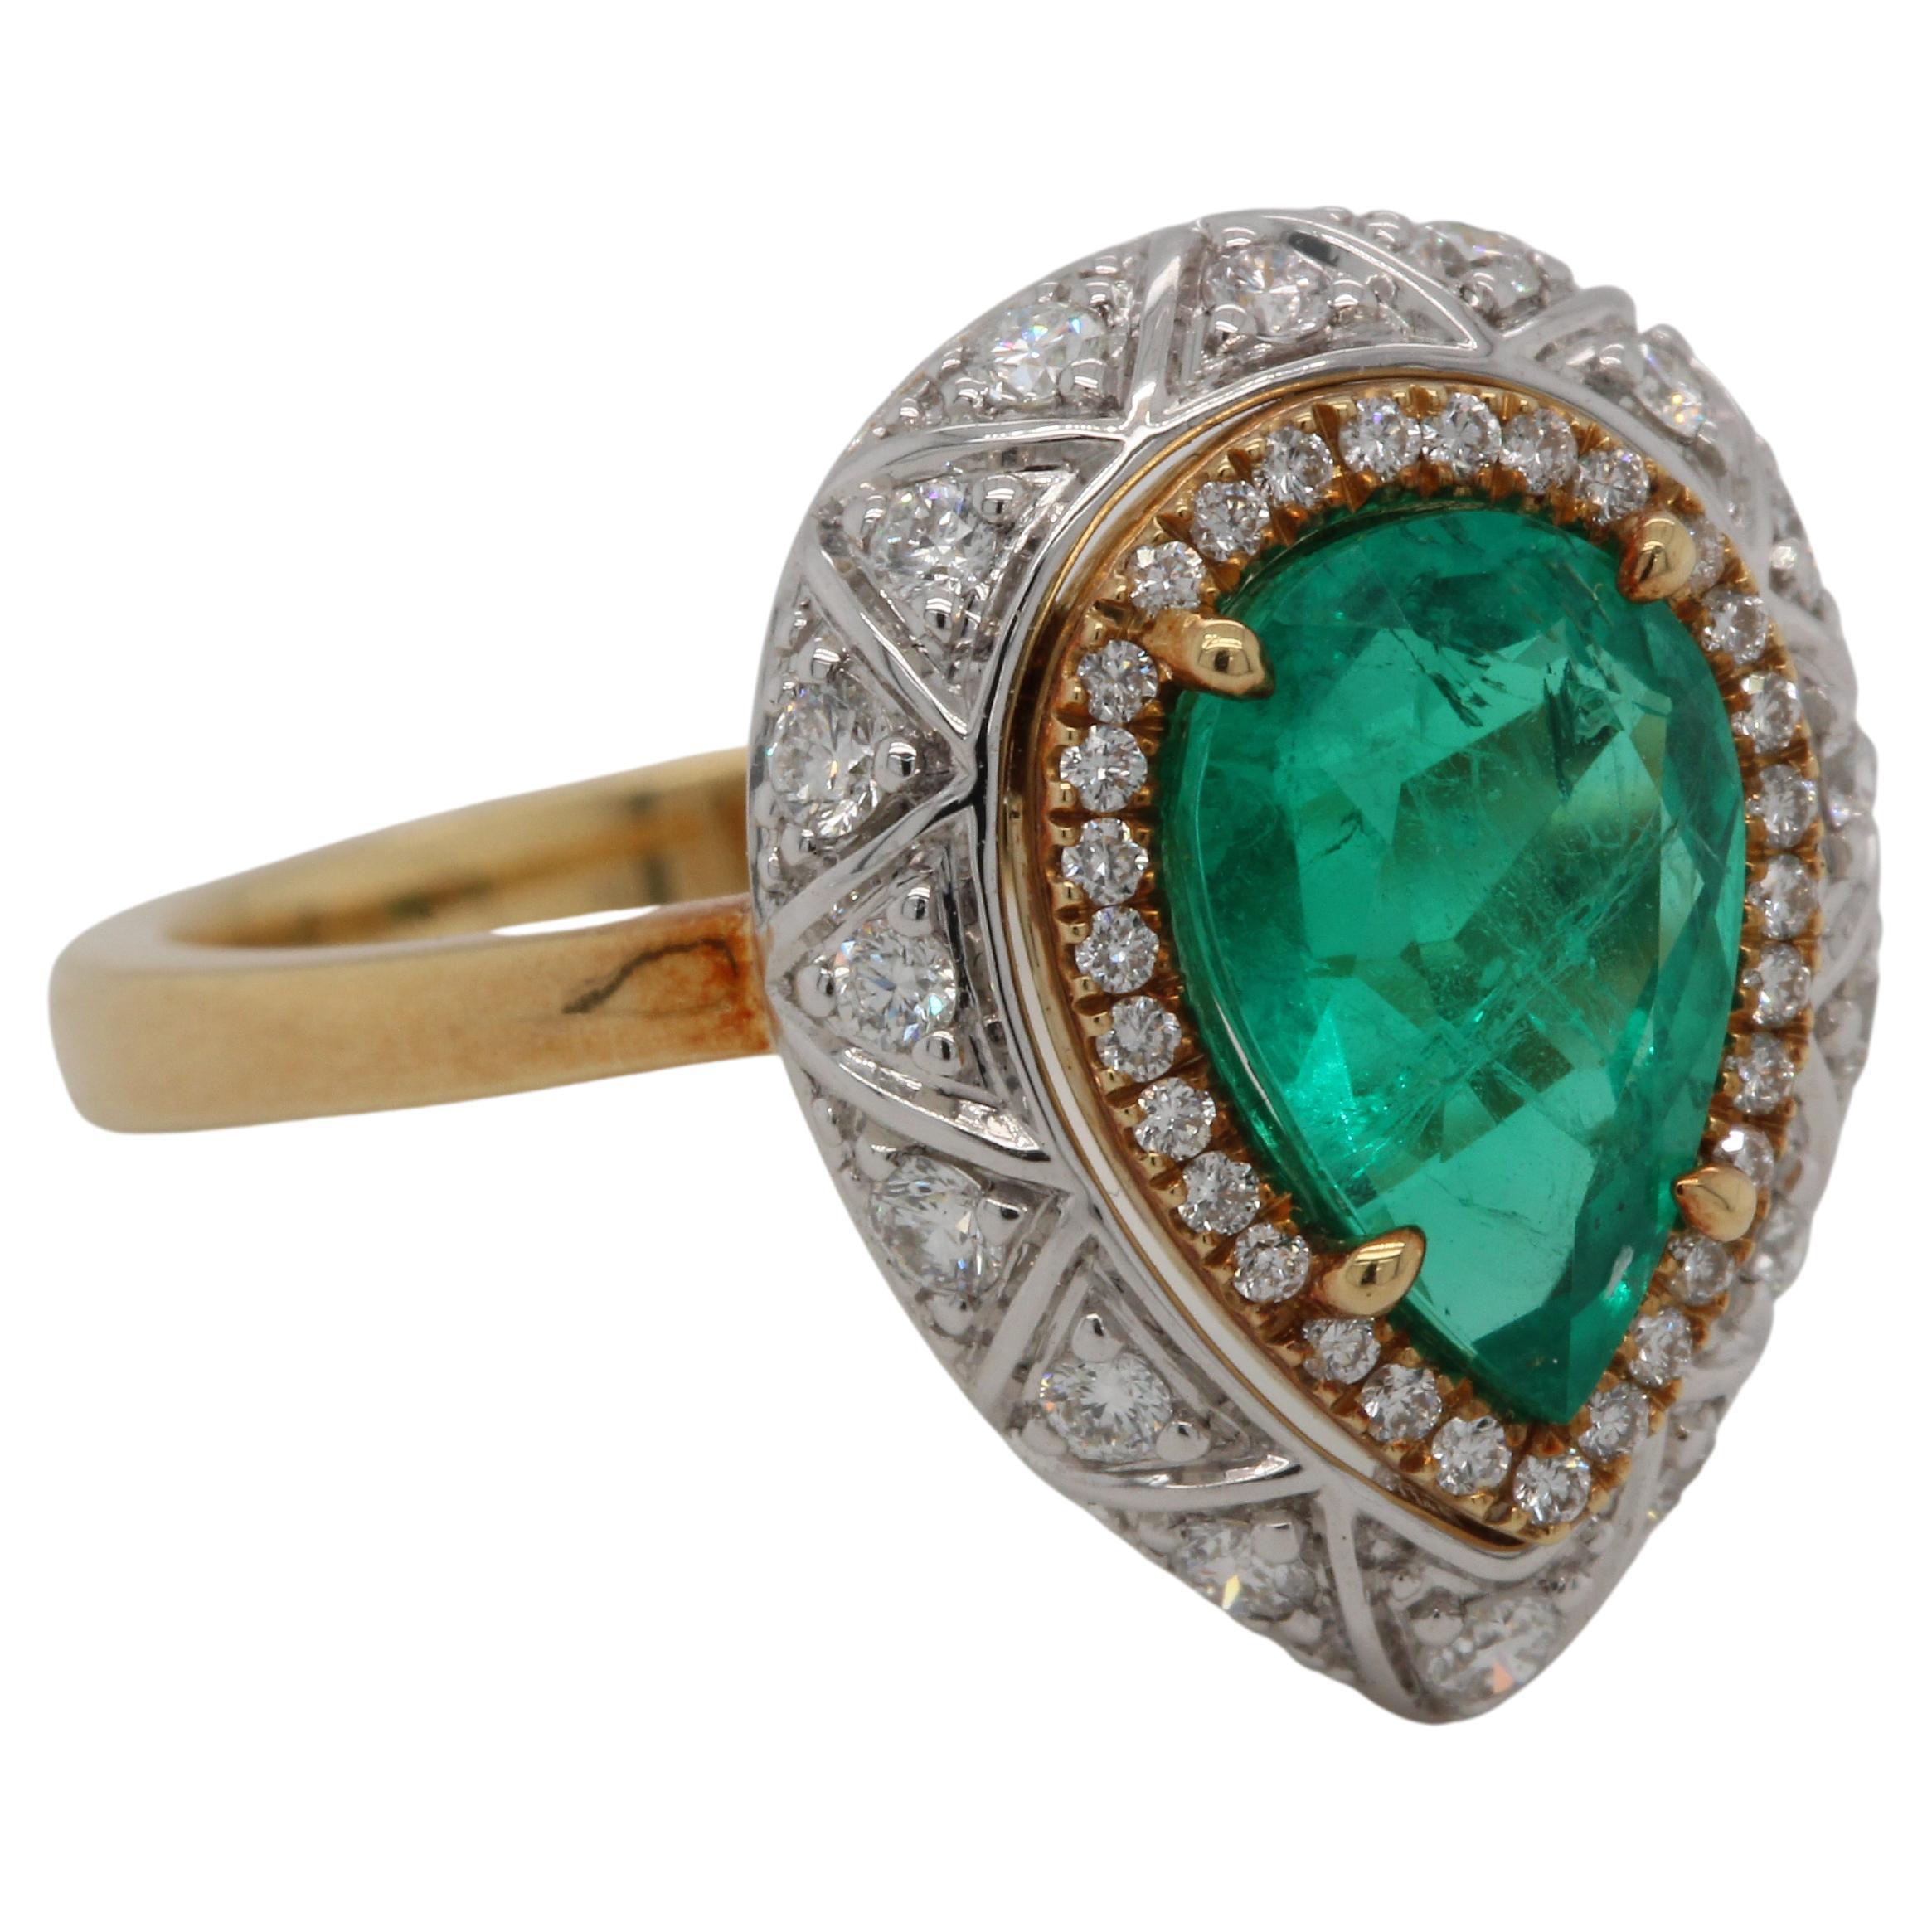 Pear Cut 1.63 Carat Emerald And Diamond Wedding Ring In 18 Karat Gold For Sale